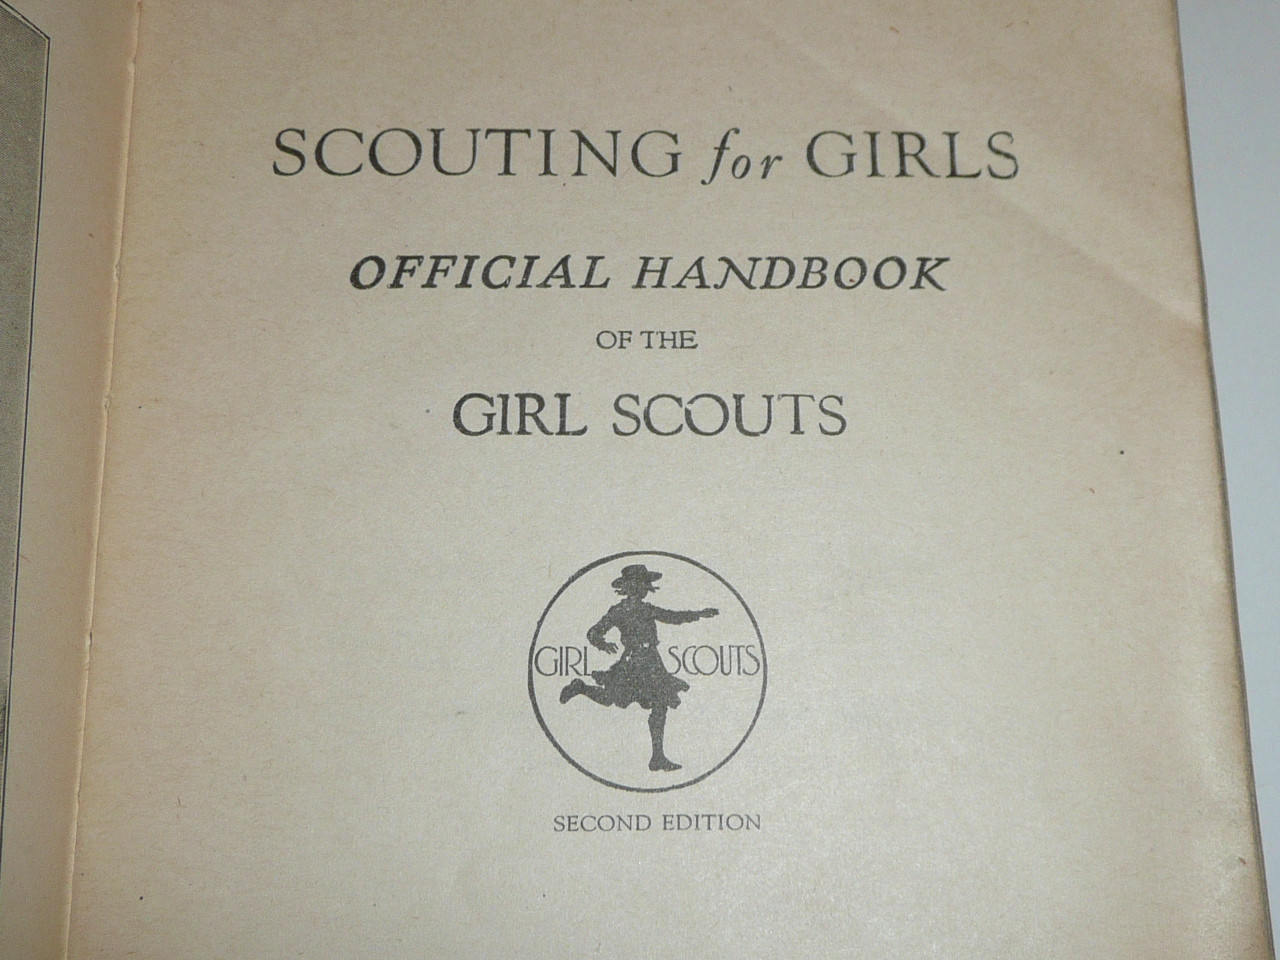 1920 Scouting for Girls, Official Girl Scout Handbook, marked second edition but has the 1920 date